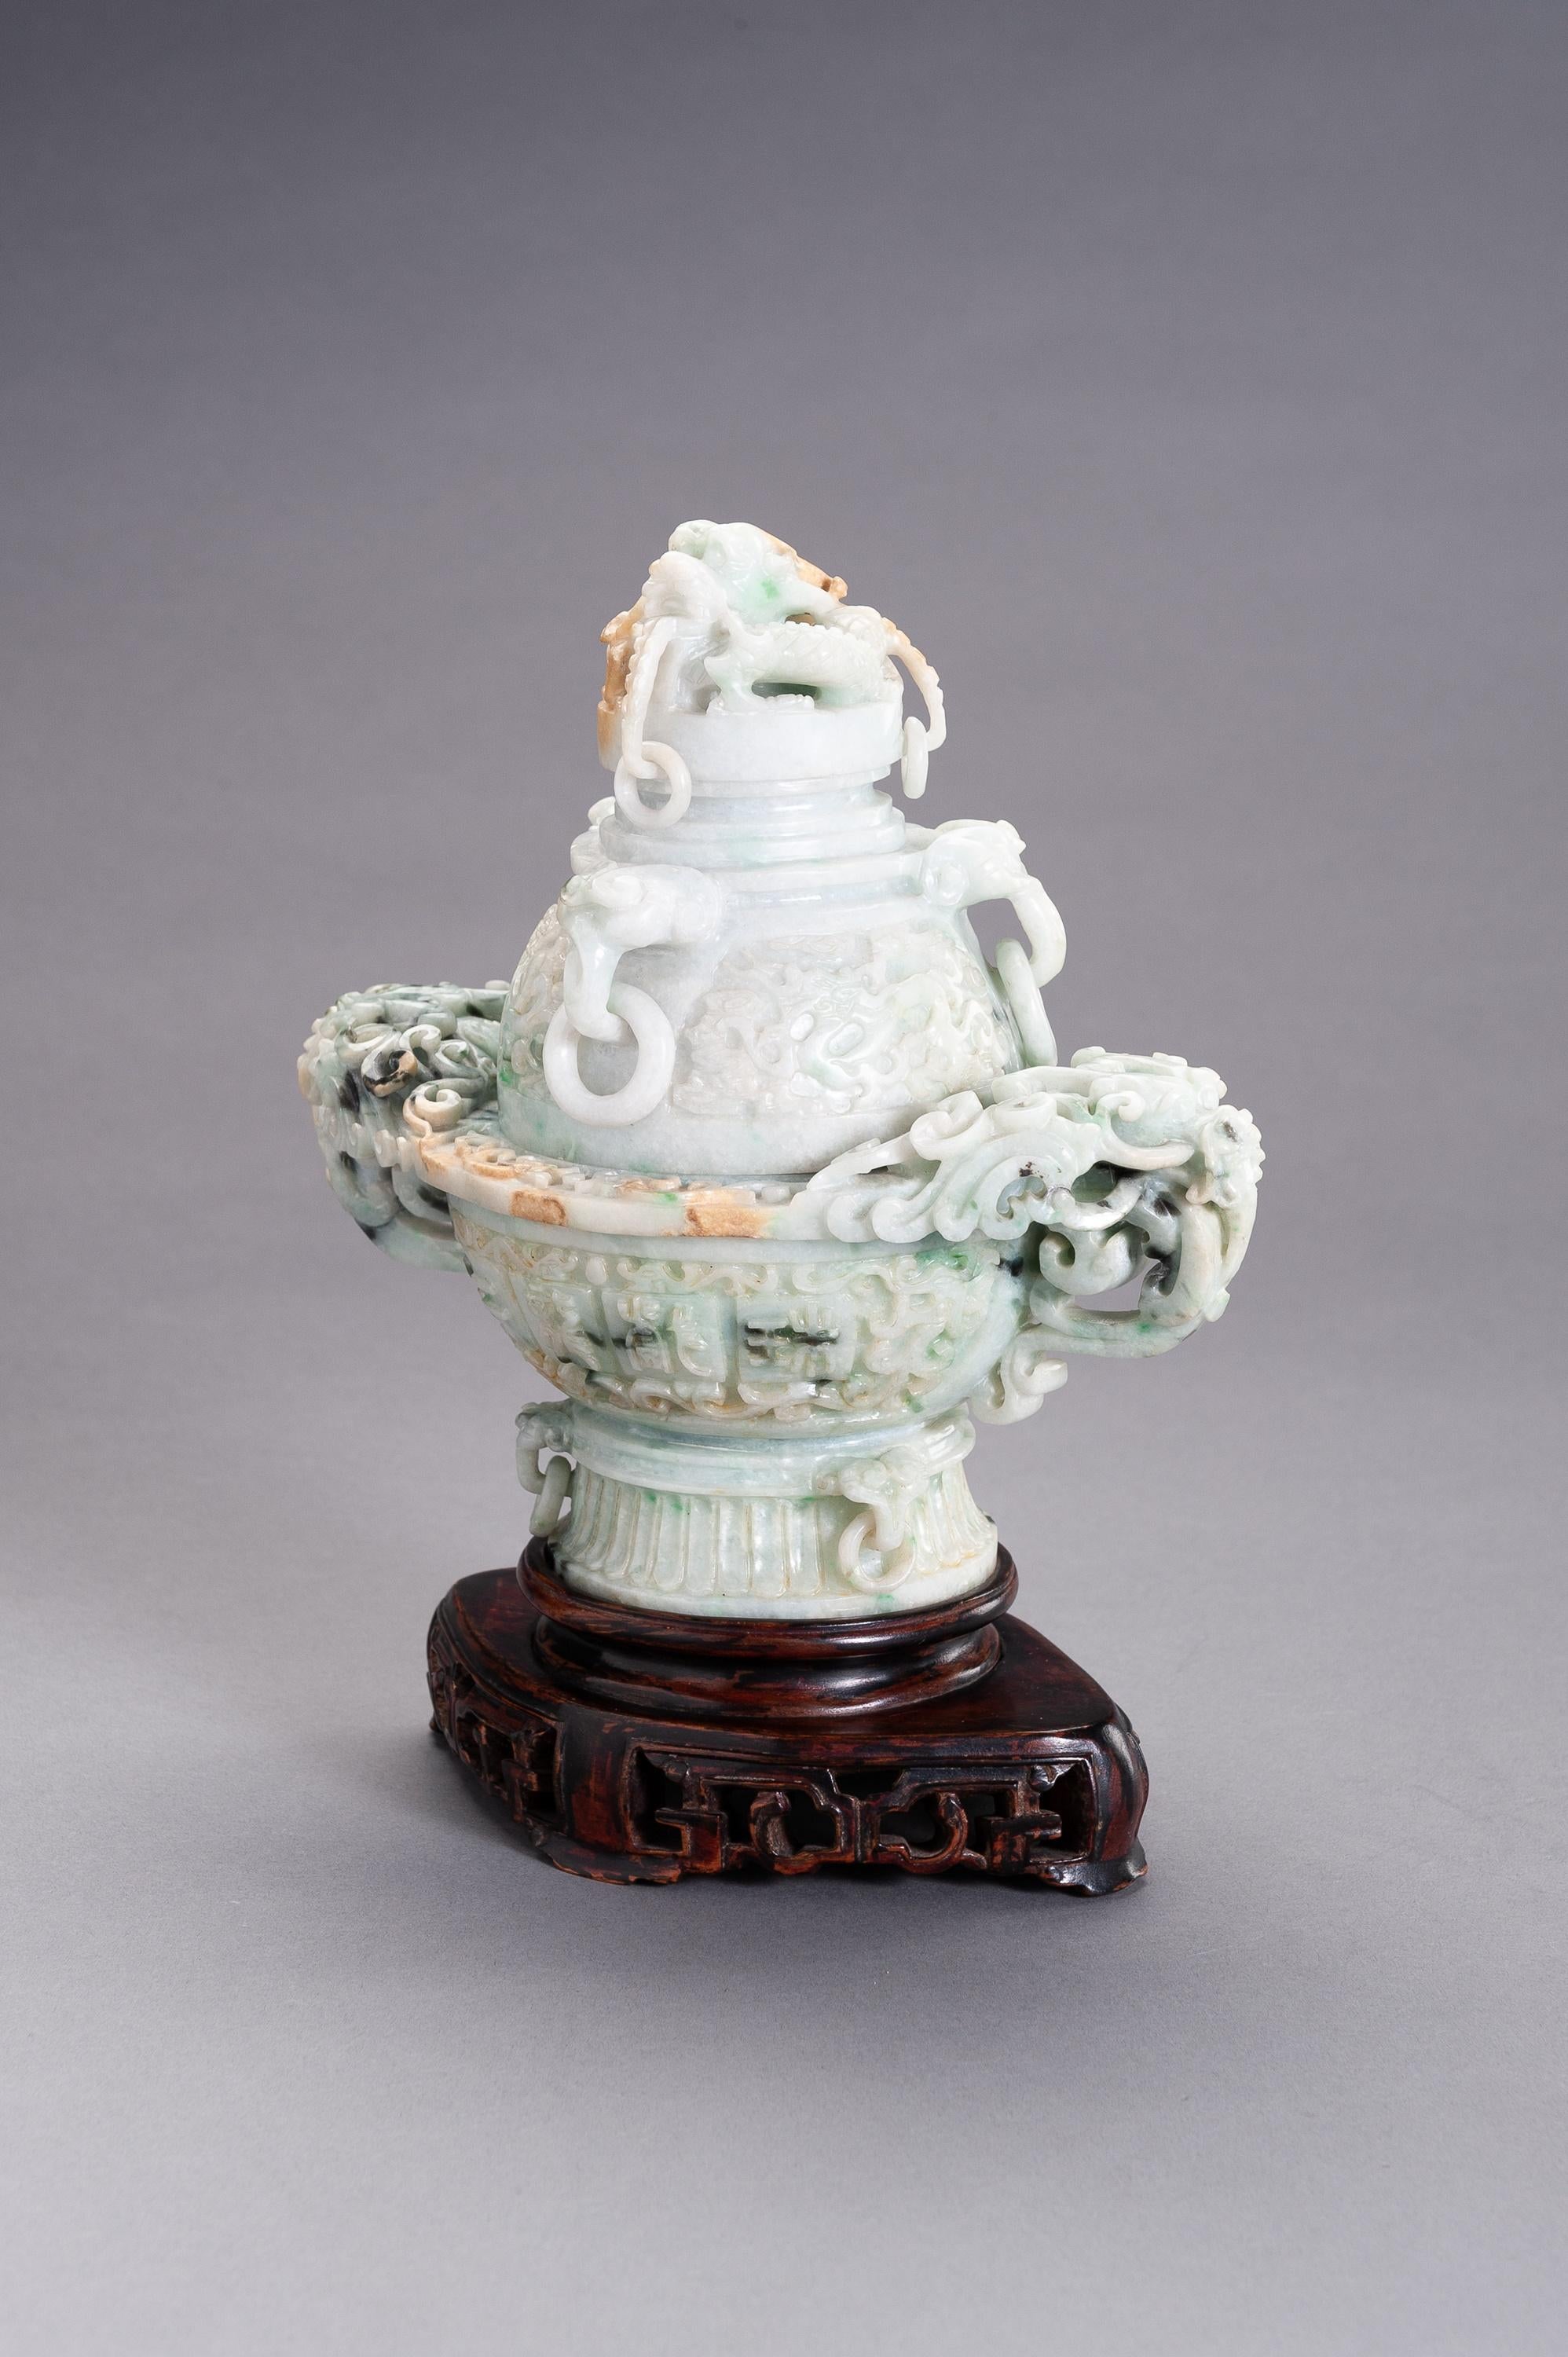 Jadeite censer and cover with dragons, China, 20th century

The censer and cover show impressive relief carving, the thick walls with a dragon motif on one side and a four-character inscription on the other reading ‘Er Long Xi Zhu’ (Two dragons